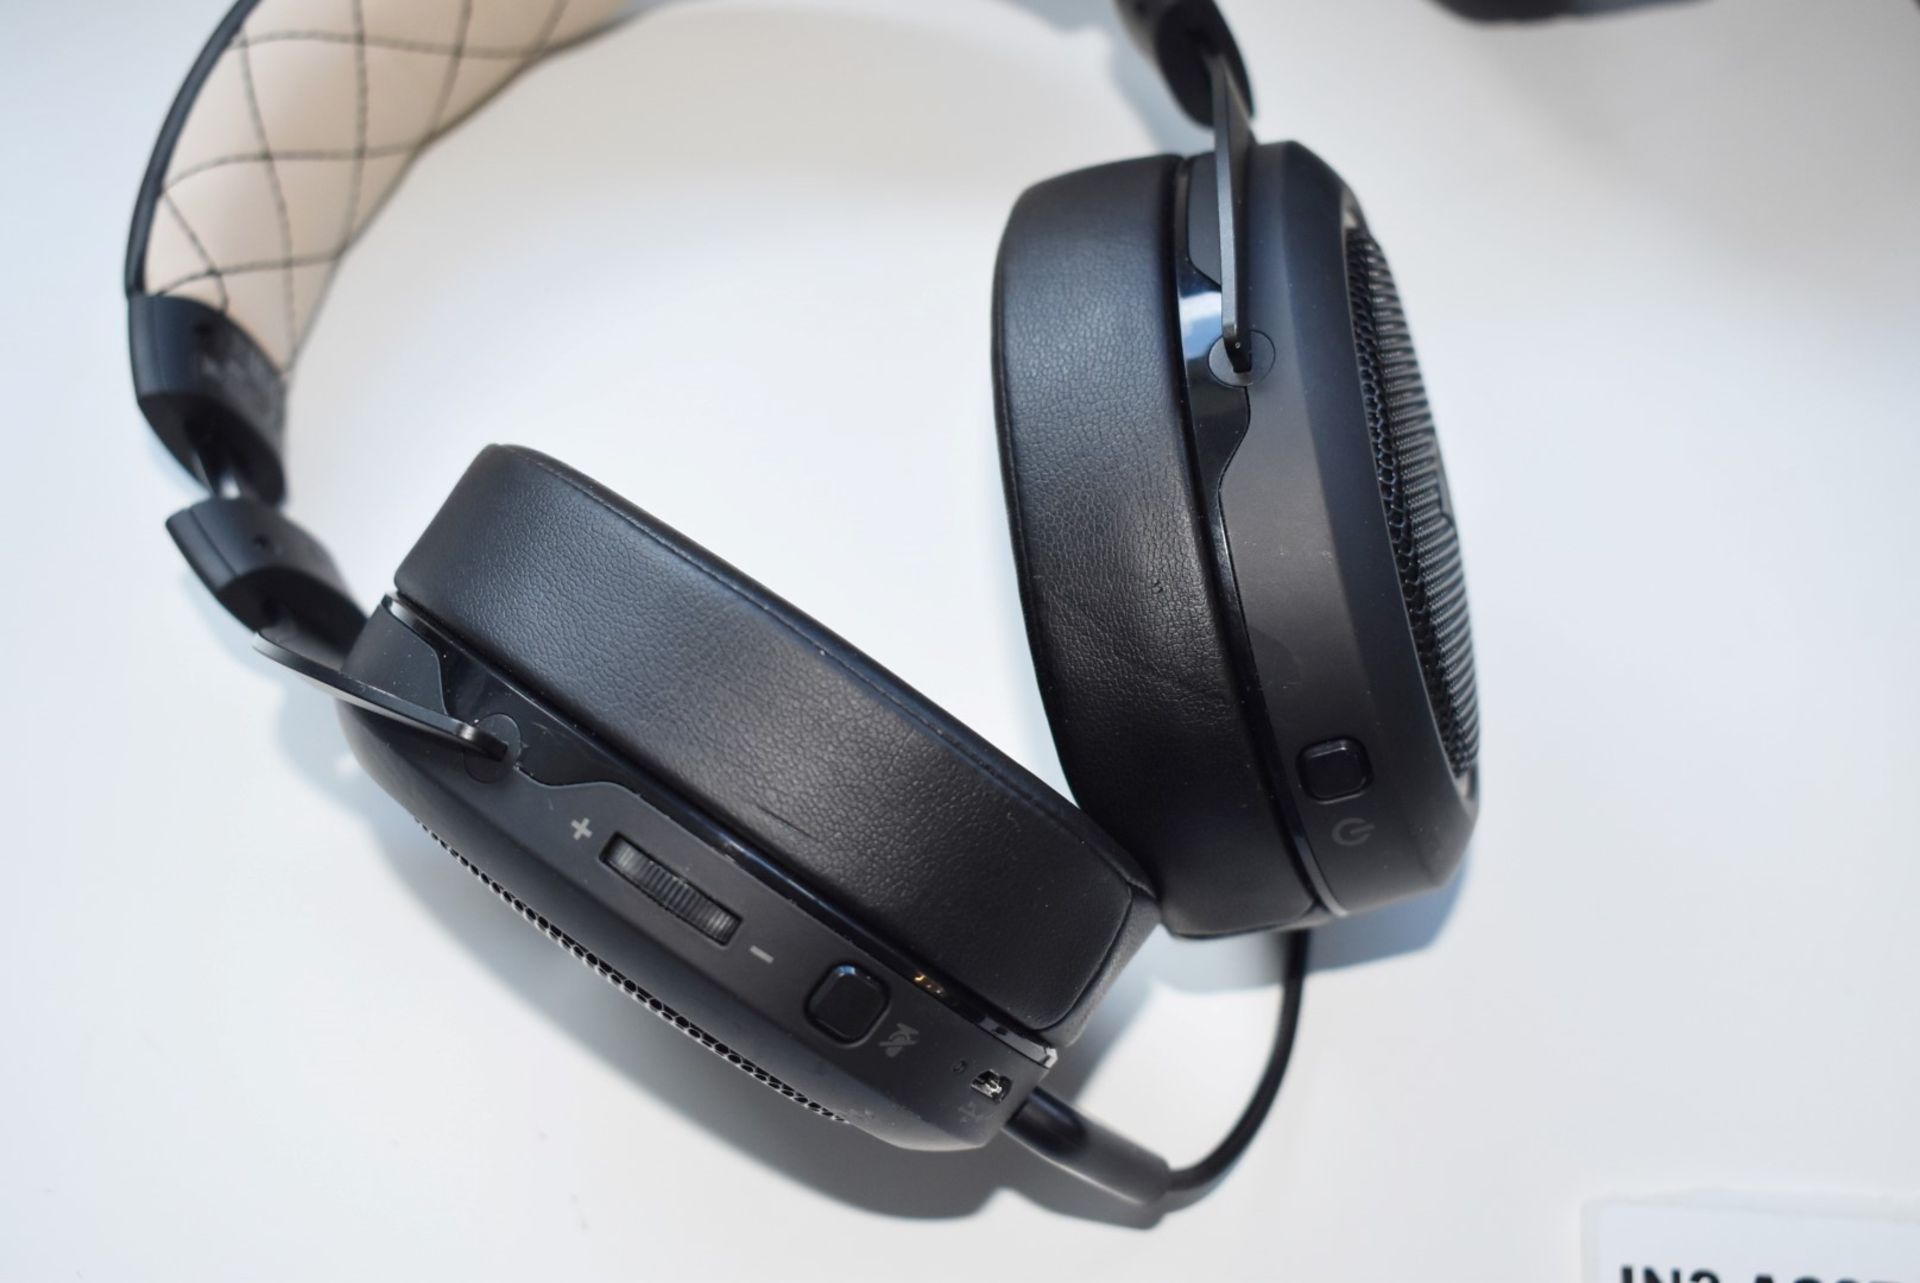 1 x Corsair Wireless 7.1 Gaming Headset With Wireless Dongle - Office Use Only - Image 4 of 6